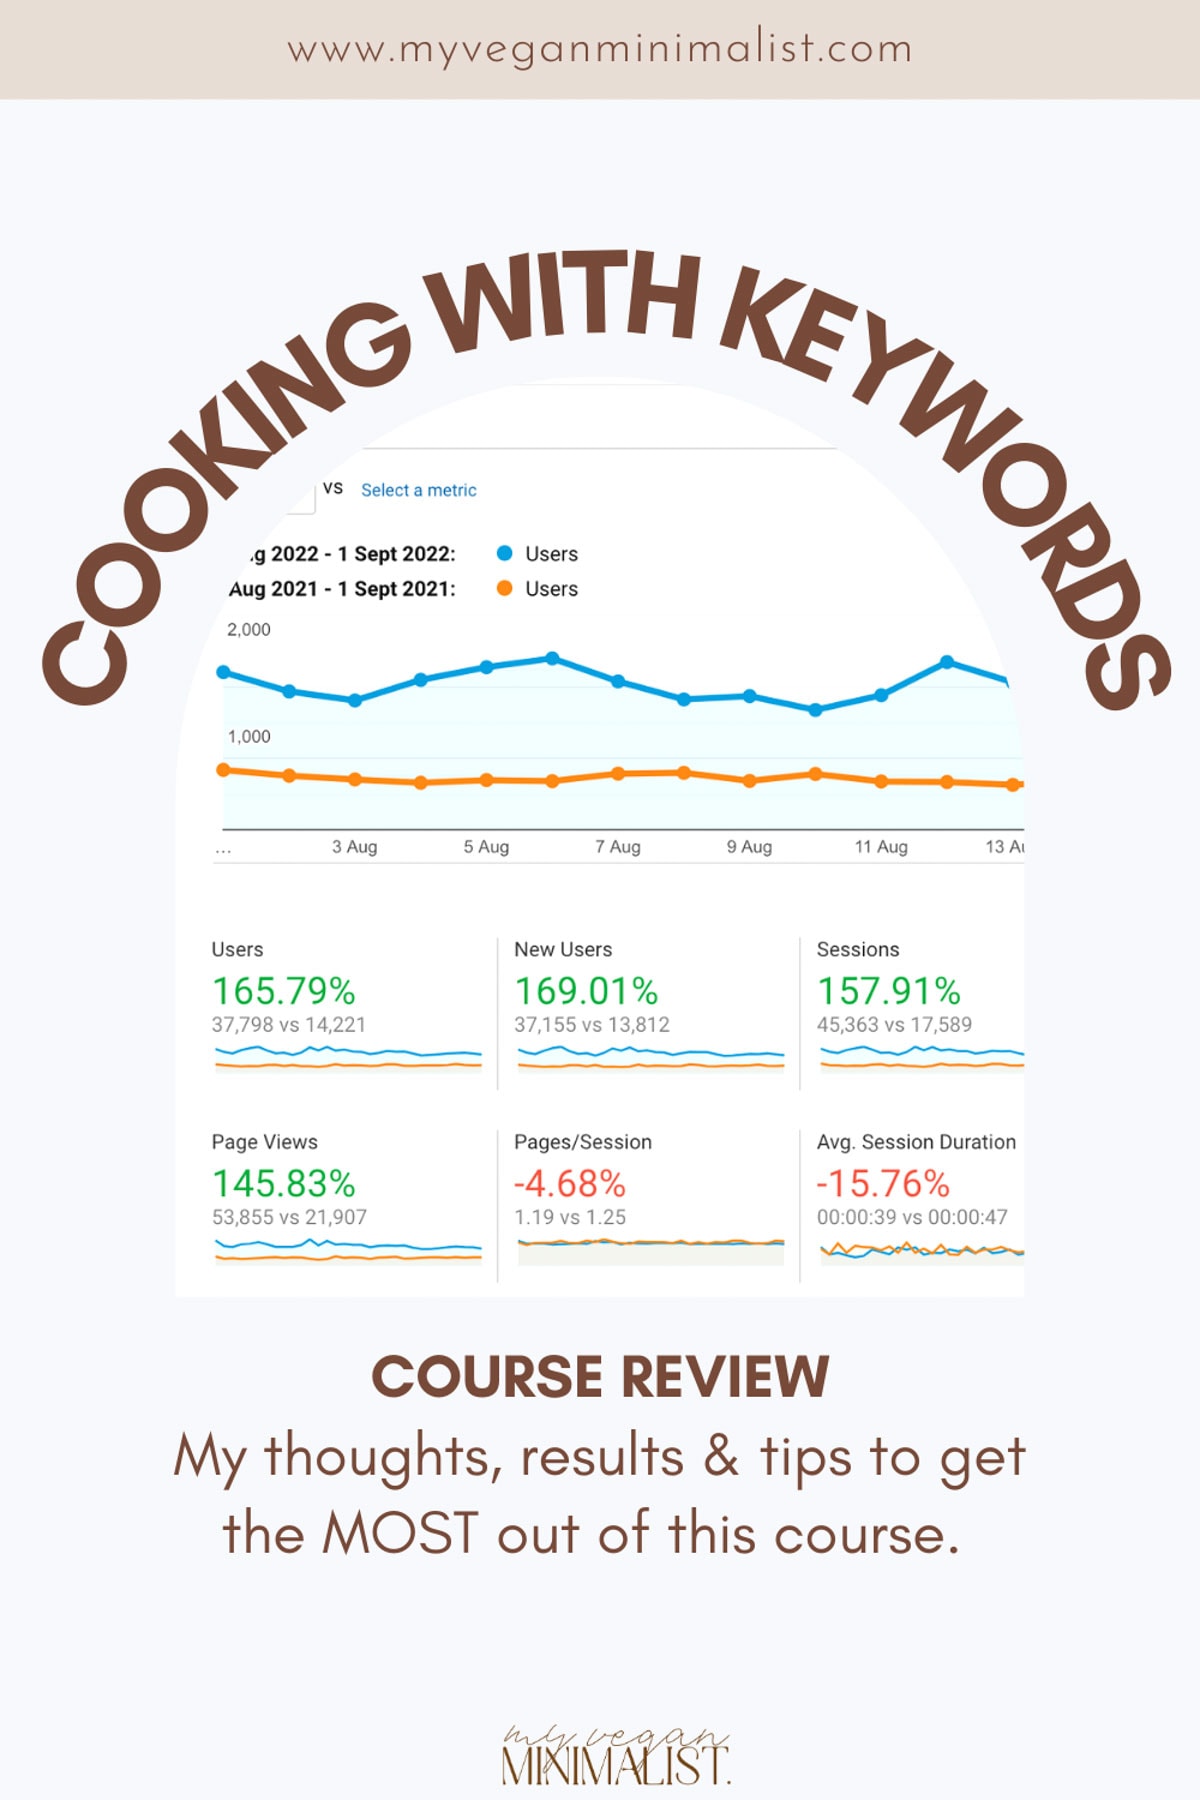 A graphic showing statistics from the Cooking with Keywords course.